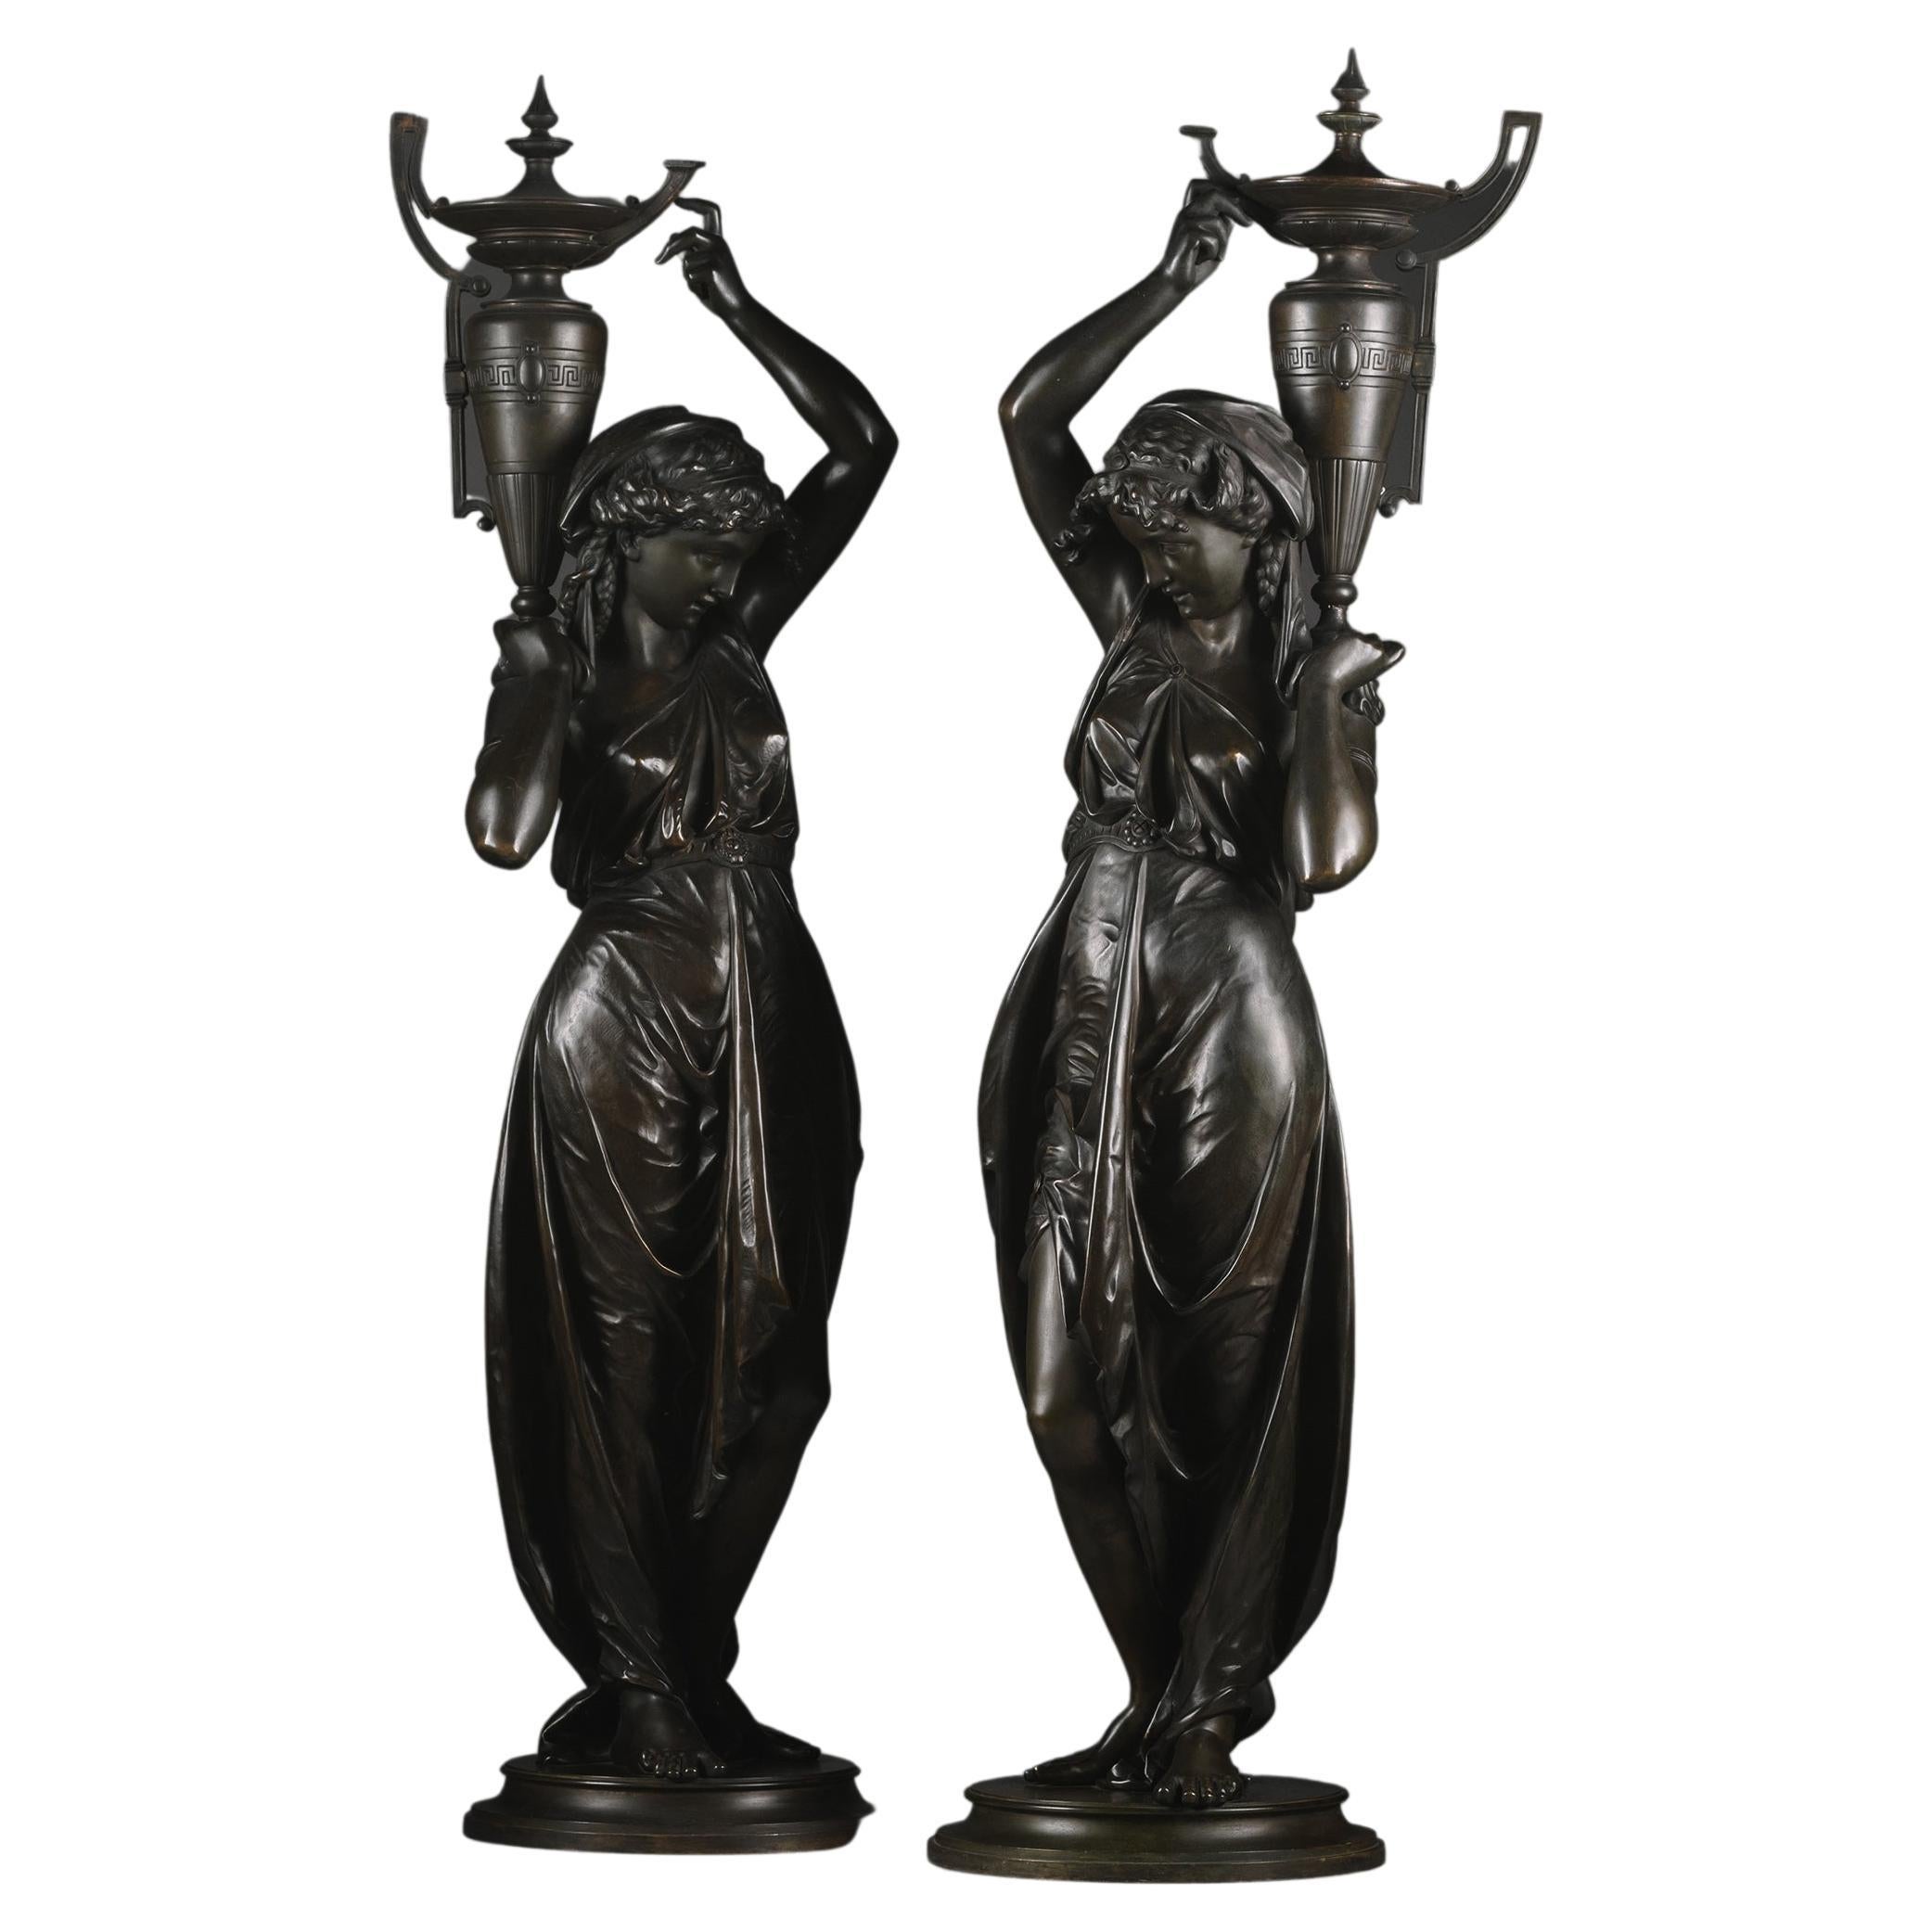 Pair Of Napoleon III Patrinated-Bronze Figures, by Victor Paillard For Sale at 1stDibs pic image